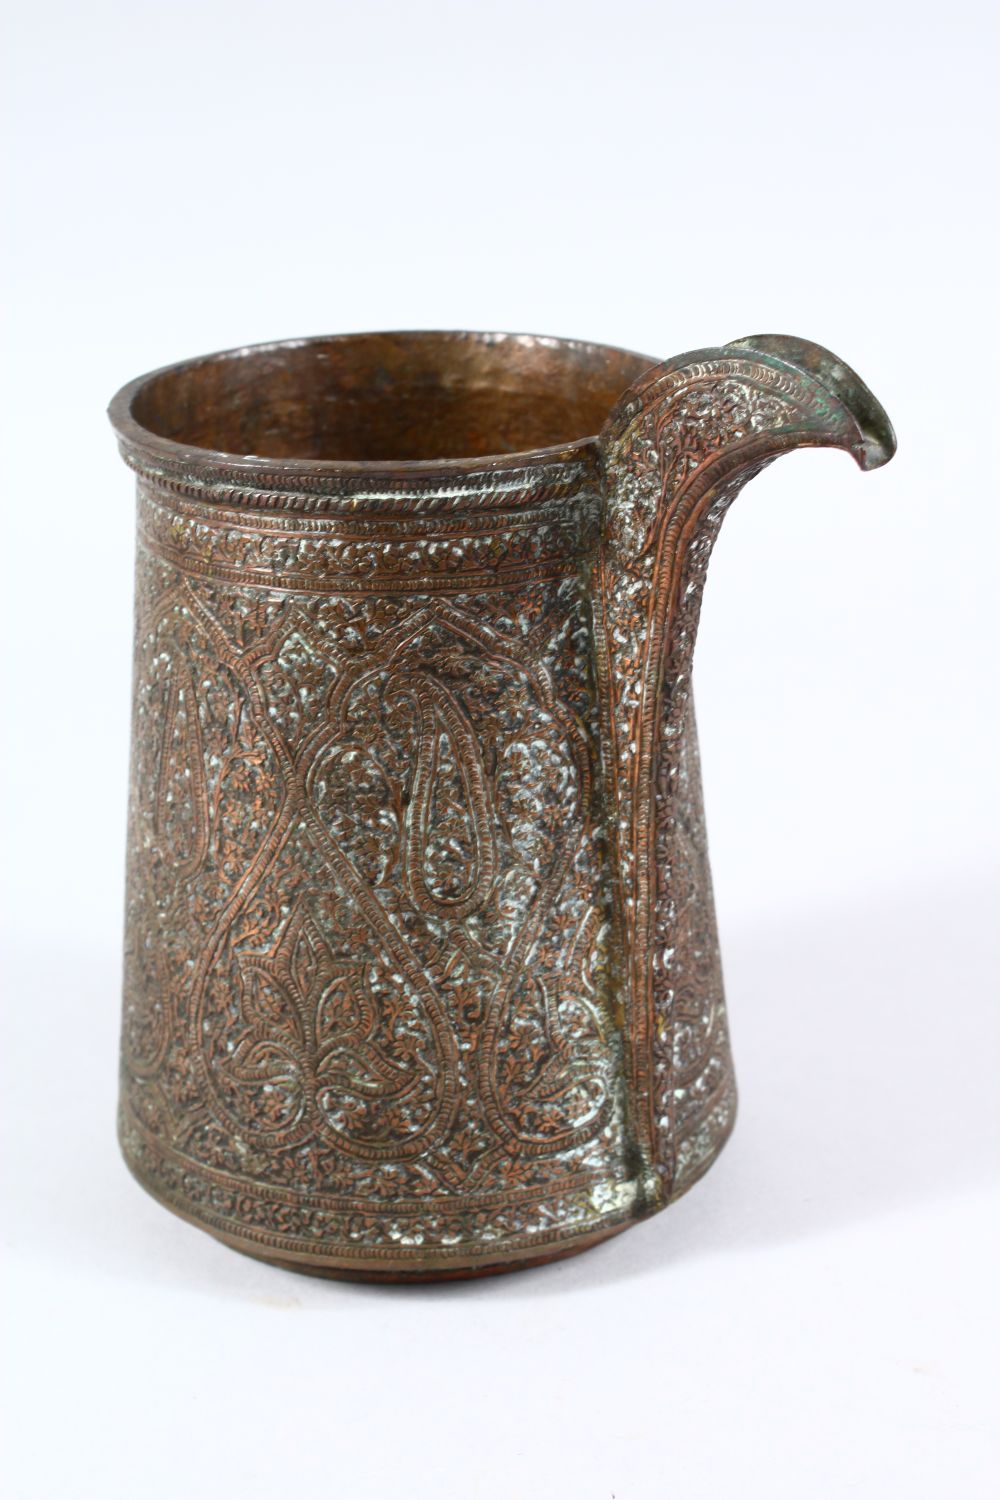 A 19TH CENTURY OR EARLIER INDO PERSIAN COPPERED BRASS SPOUTED JUG, with chased floral motiv - Image 2 of 5